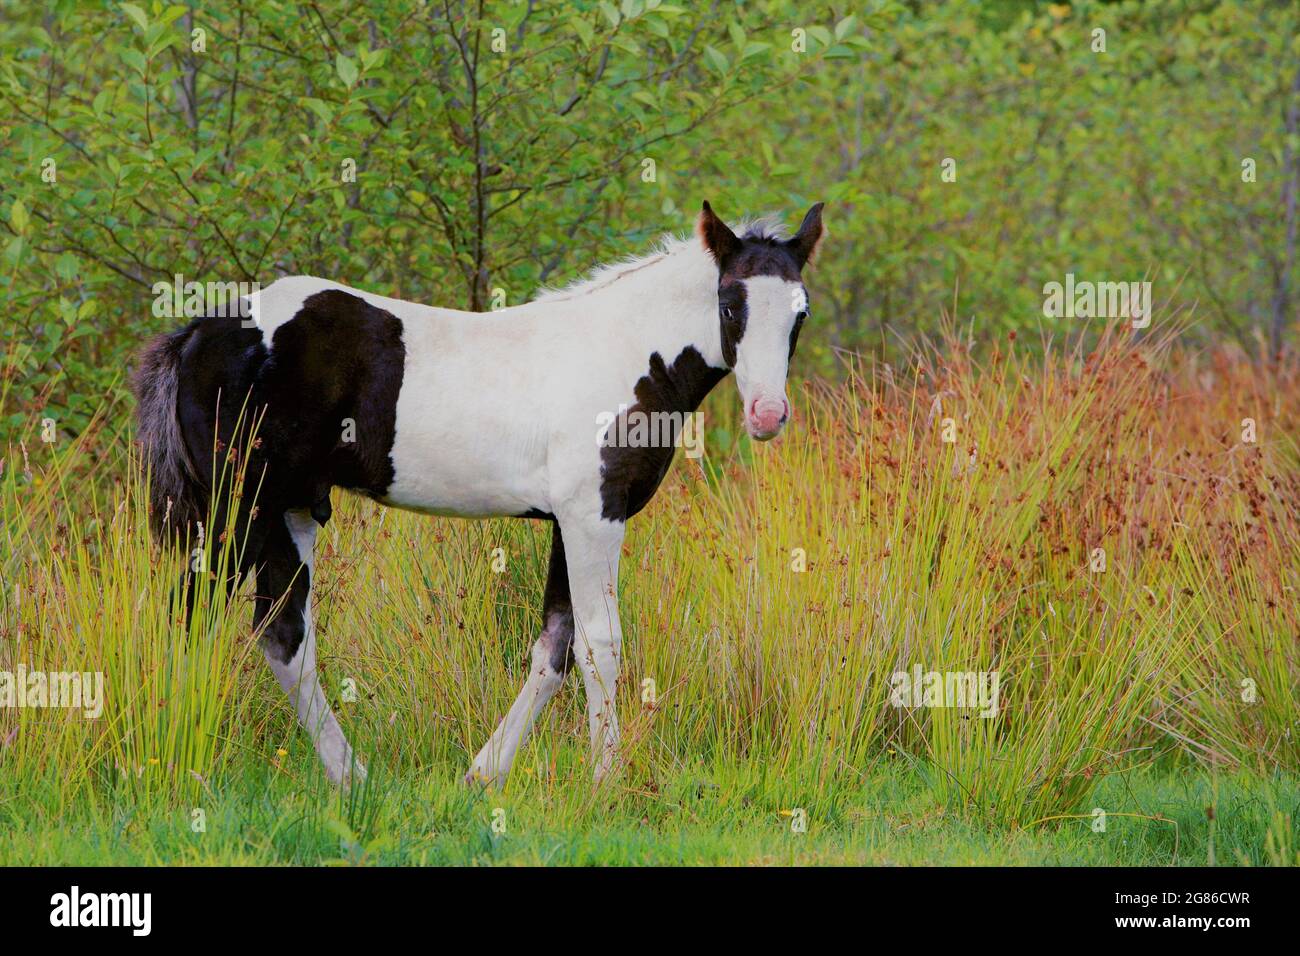 Black and White Paint Colt standing at pasture in high grass Stock Photo